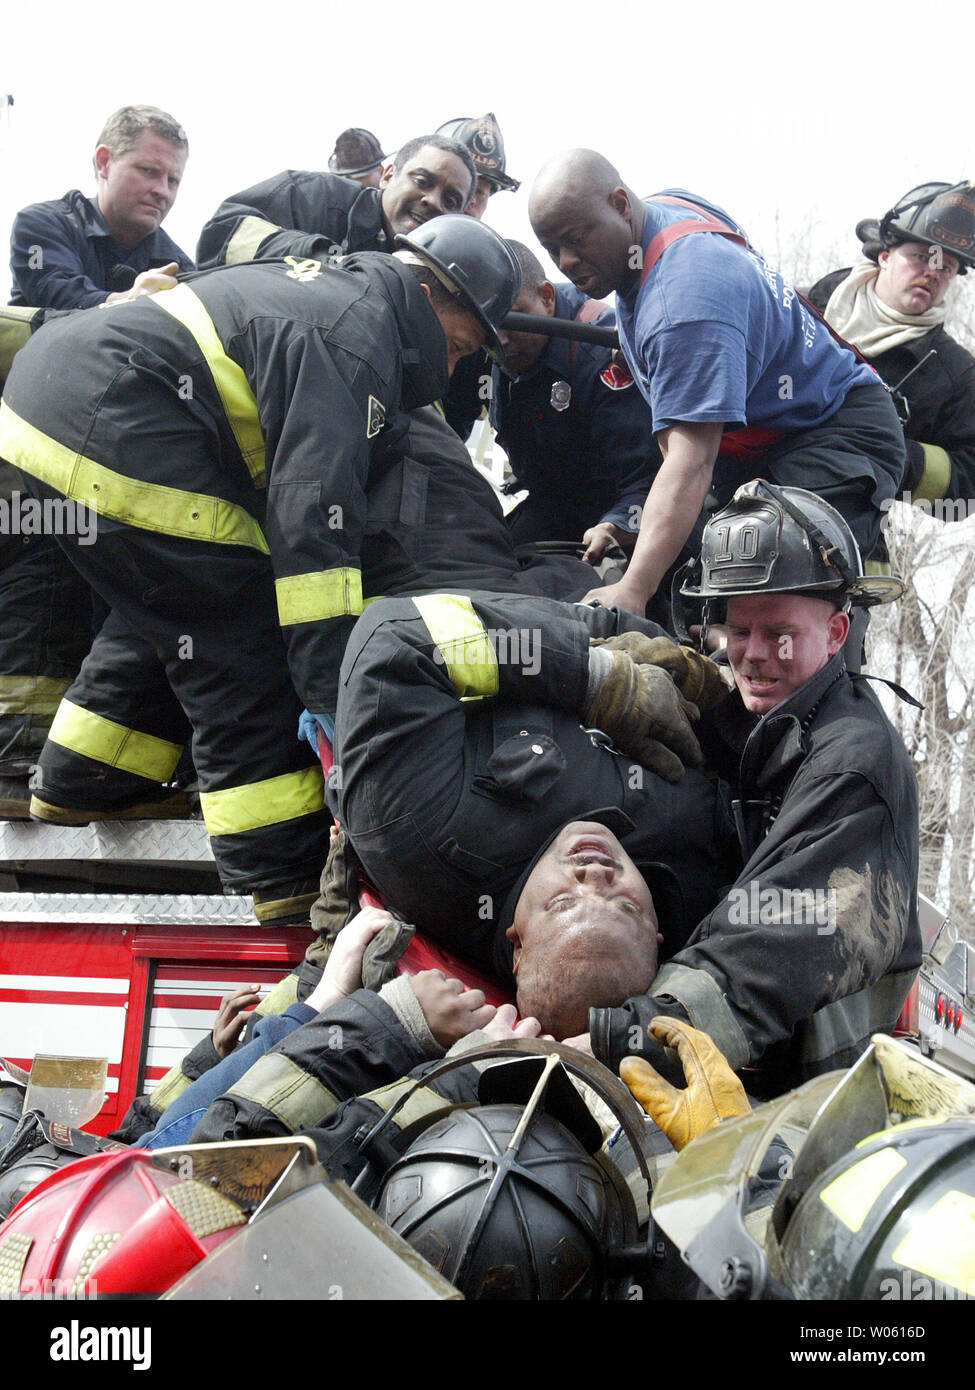 St. Louis firefighters lower fellow firrefighter Leonard Davis down to a waiting ambulance after Davis tumbled backwards down a hook and ladder during a two-alarm fire in north St. Louis on March 21, 2005. Moments earlier, firefighters discovered the body of a woman in a burned-out bedroom at the two-story home . Davis was taken to a local hospital for treatment of a possible broken foot. (UPI Photo/Bill Greenblatt) Stock Photo